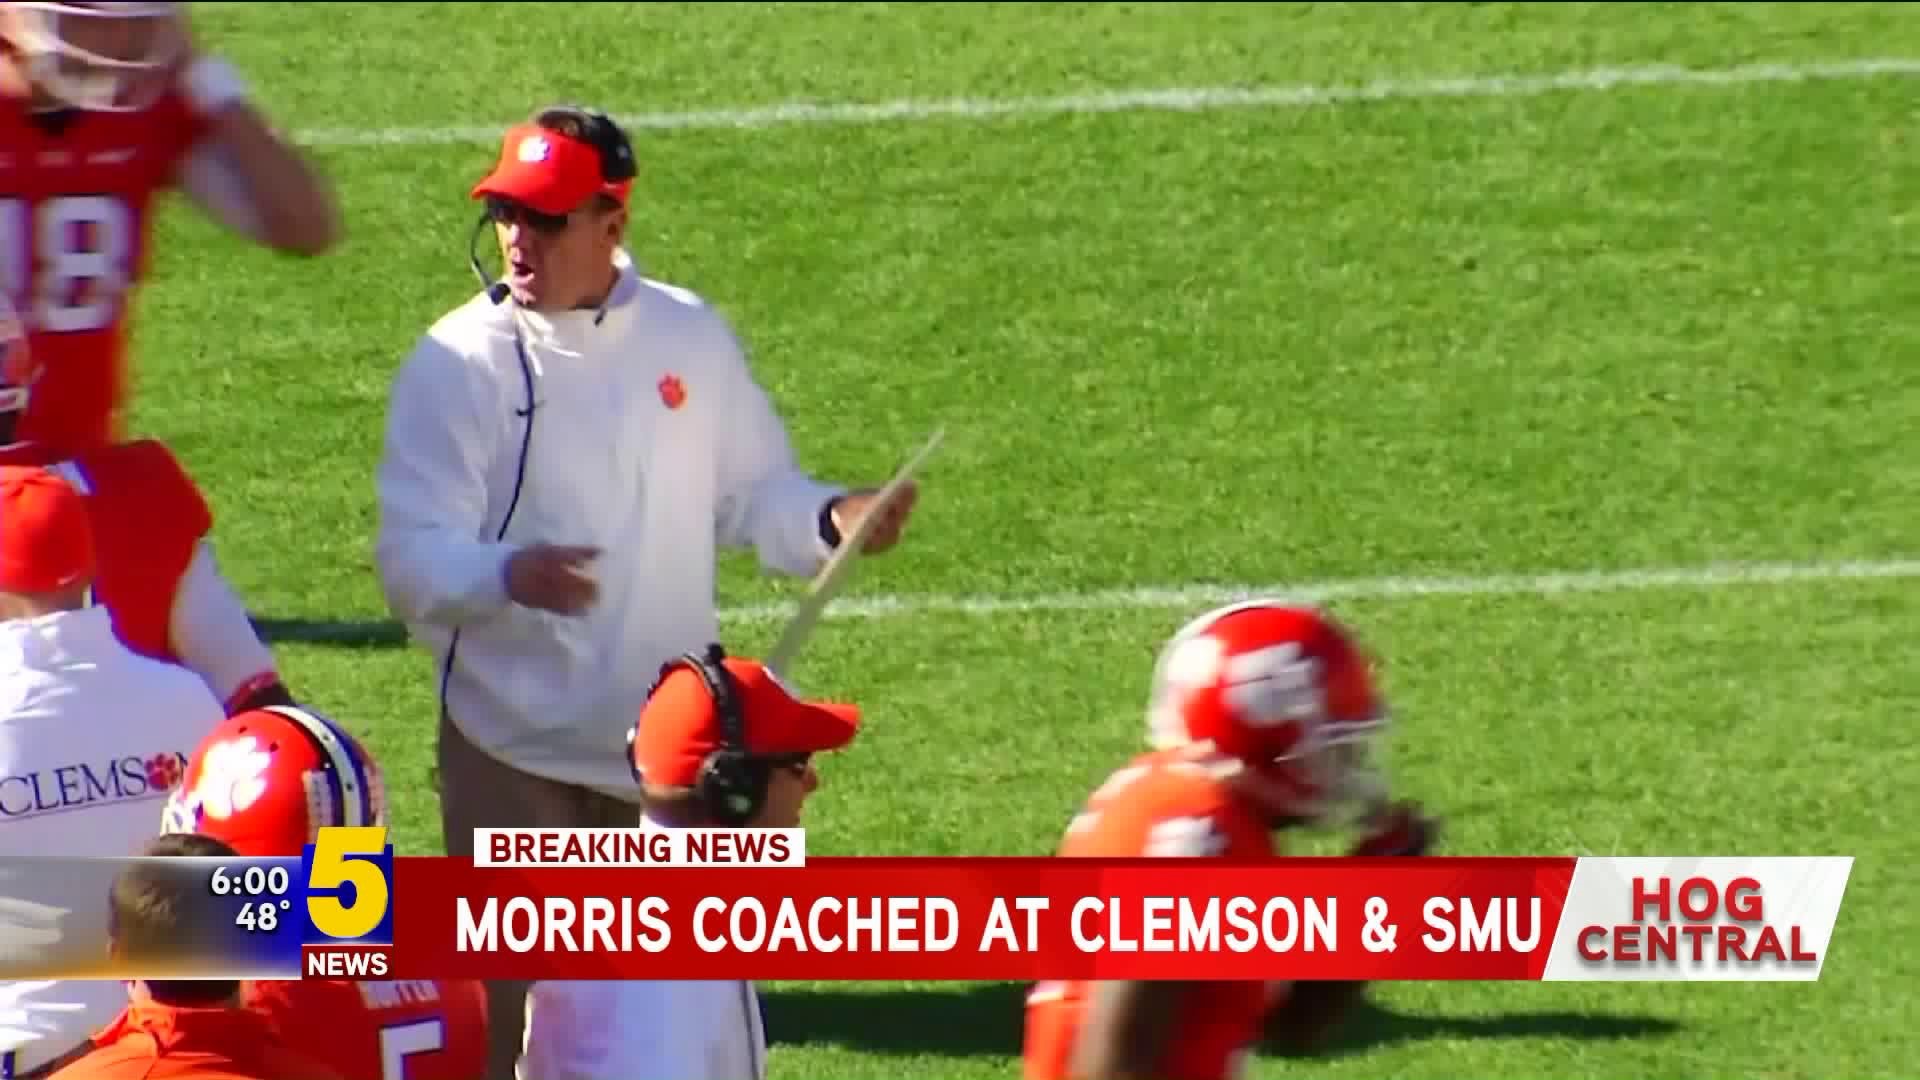 Who is Chad Morris?